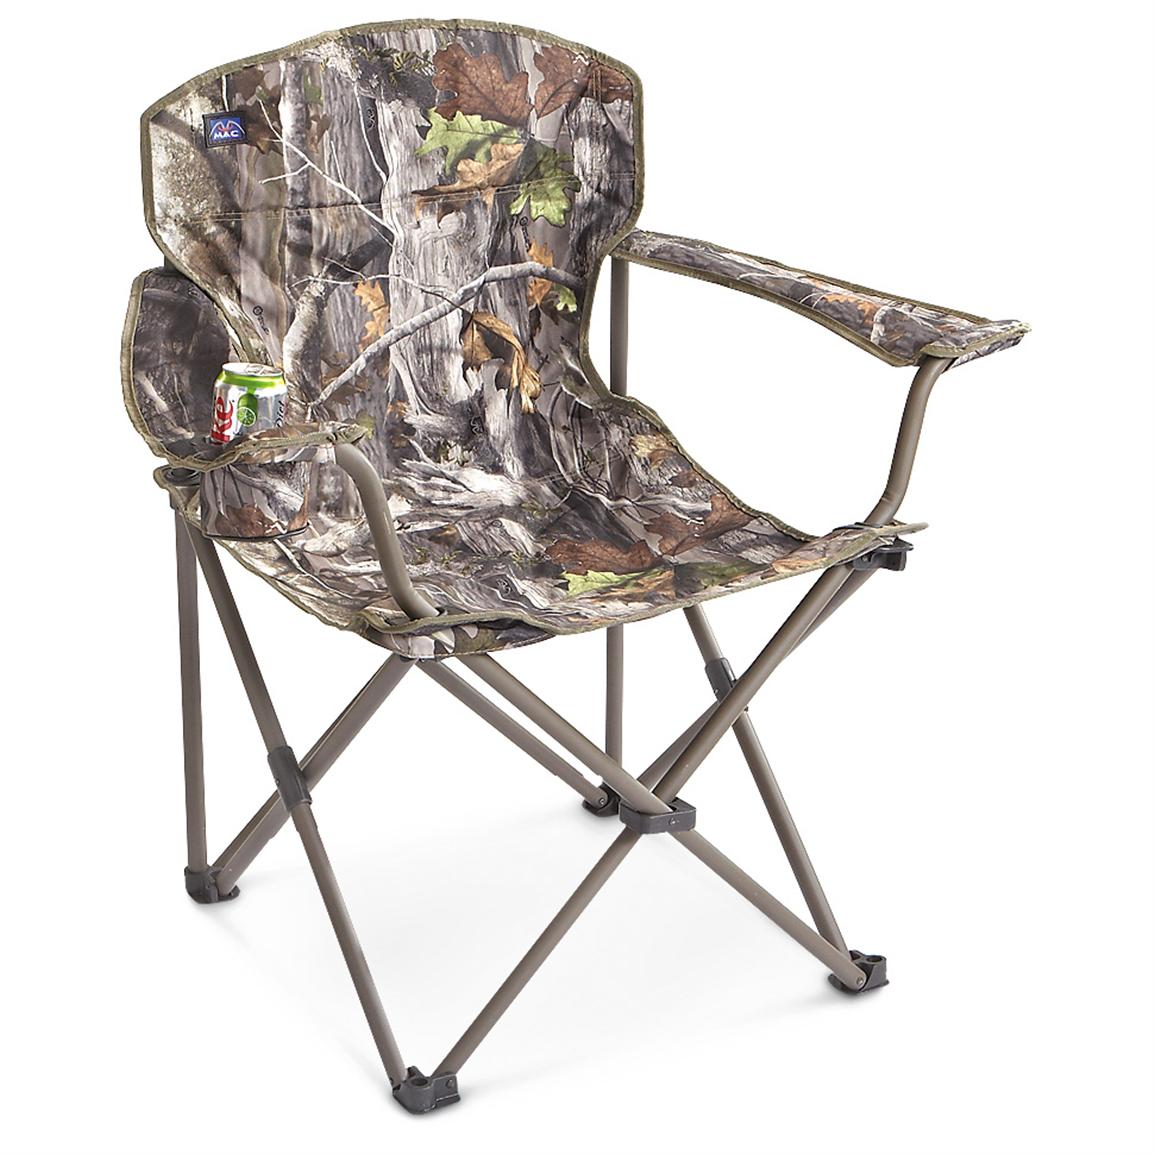 Camo Camp Chair, NextG1™ Camo - 214666, Chairs at Sportsman's Guide